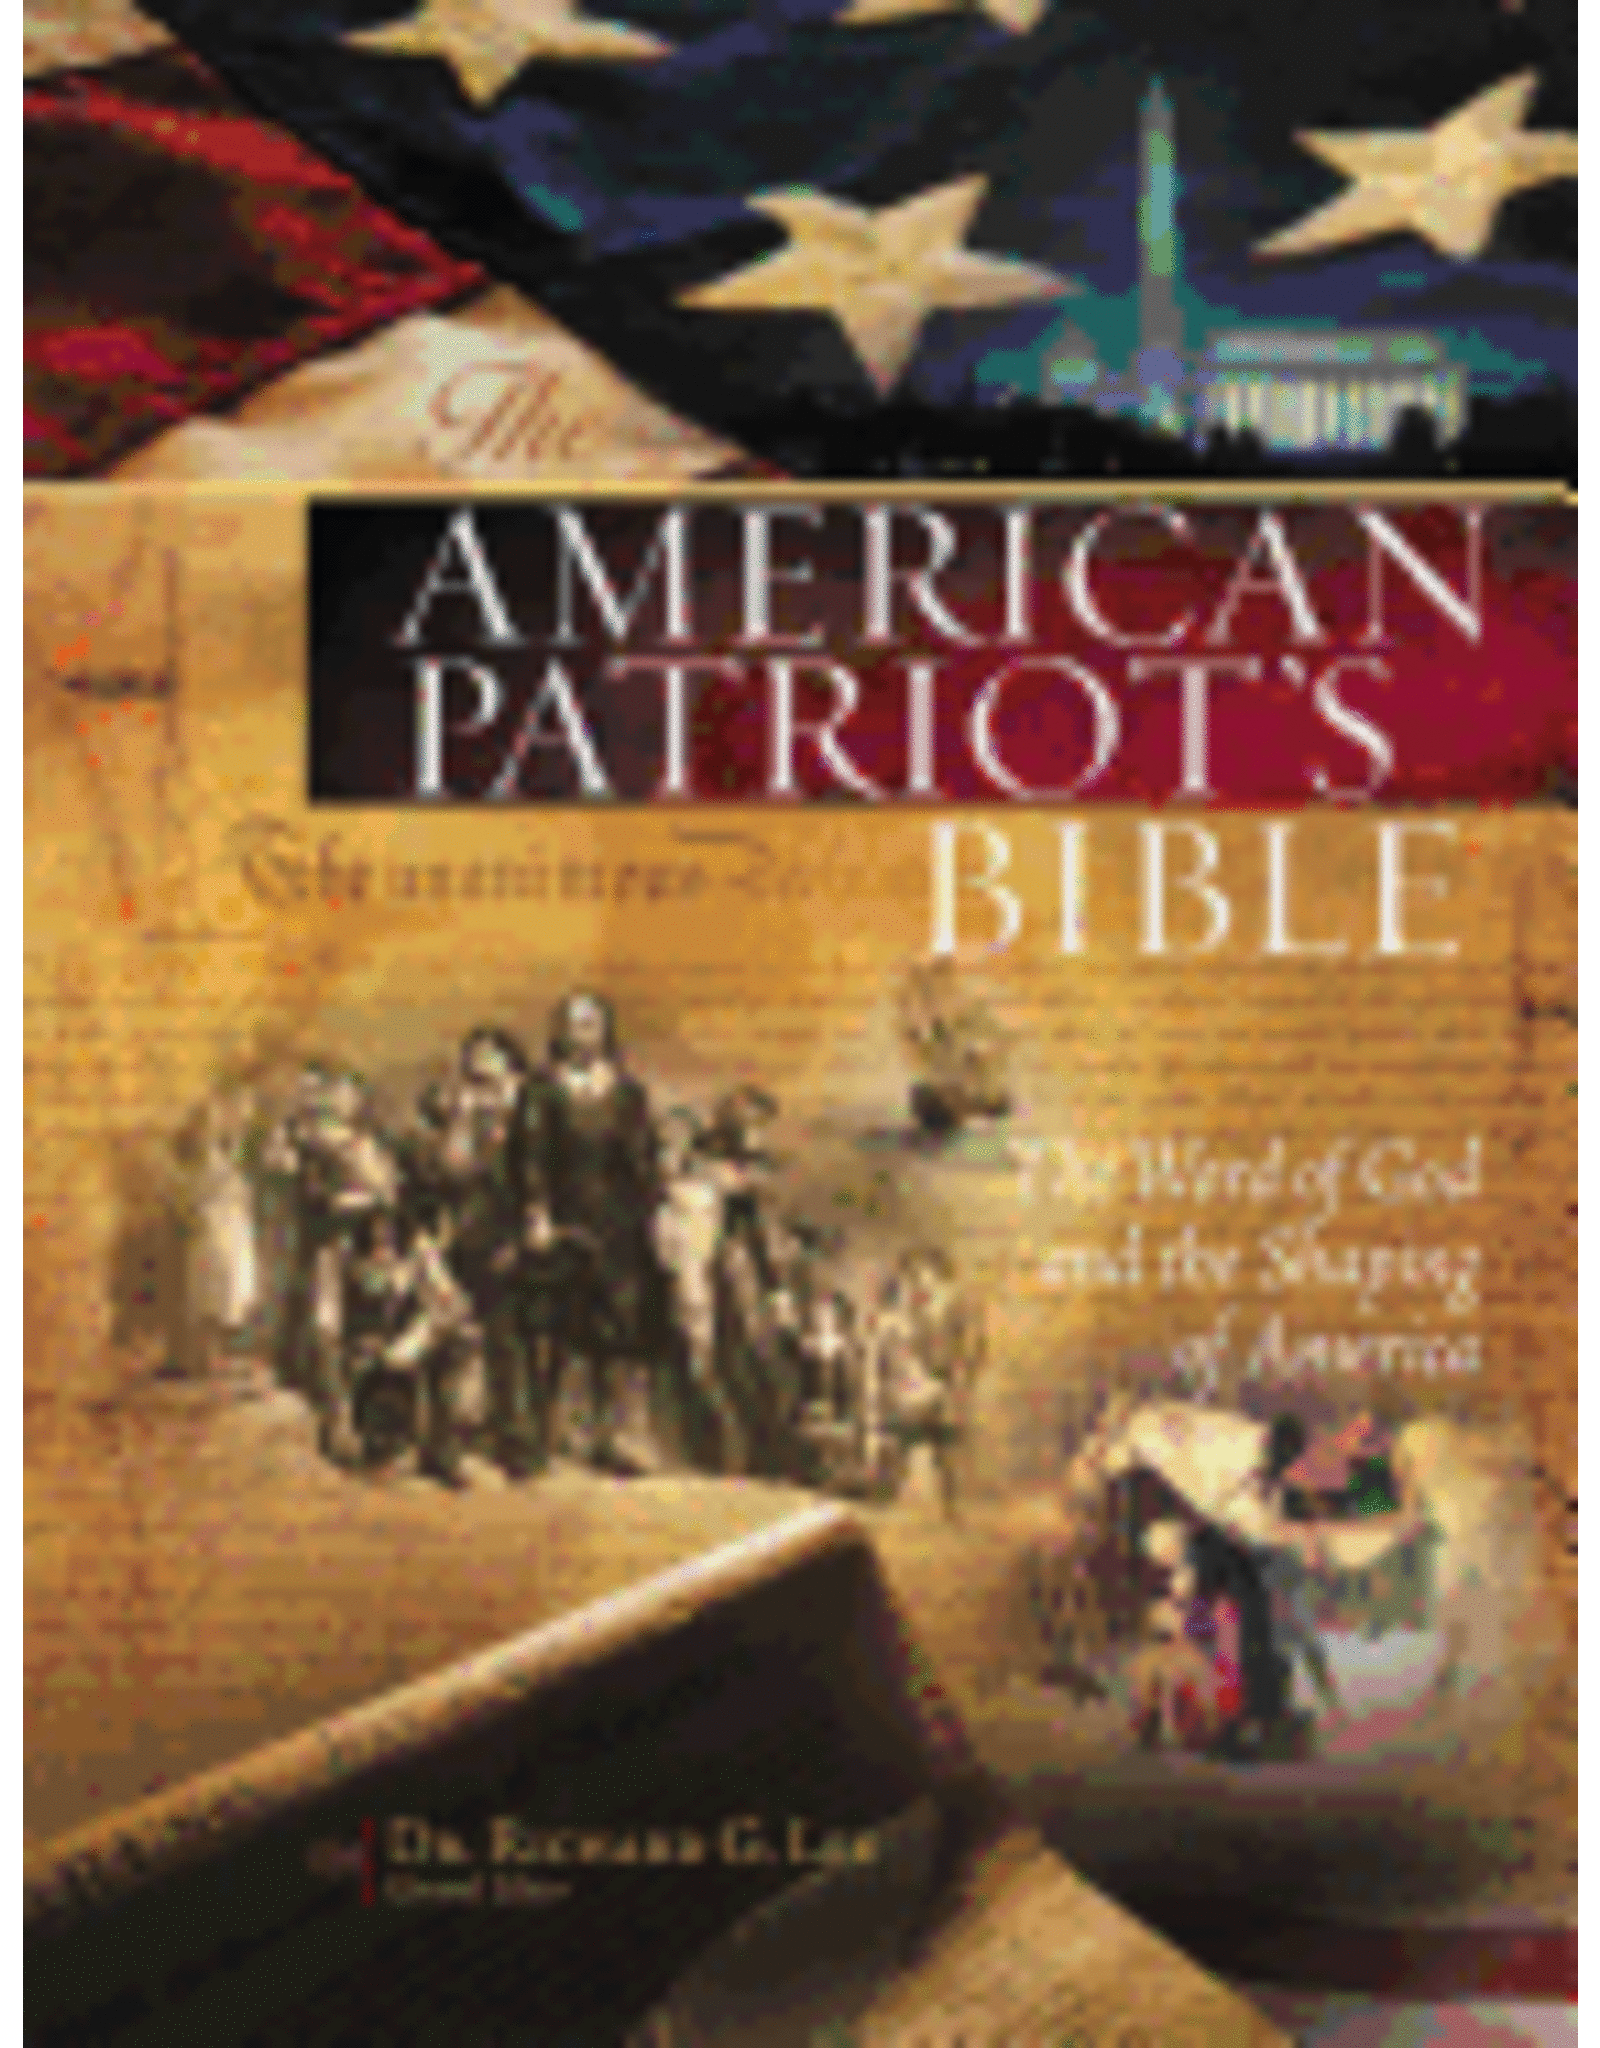 NKJV American Patriot's Bible: The Word of God & the Shaping of America